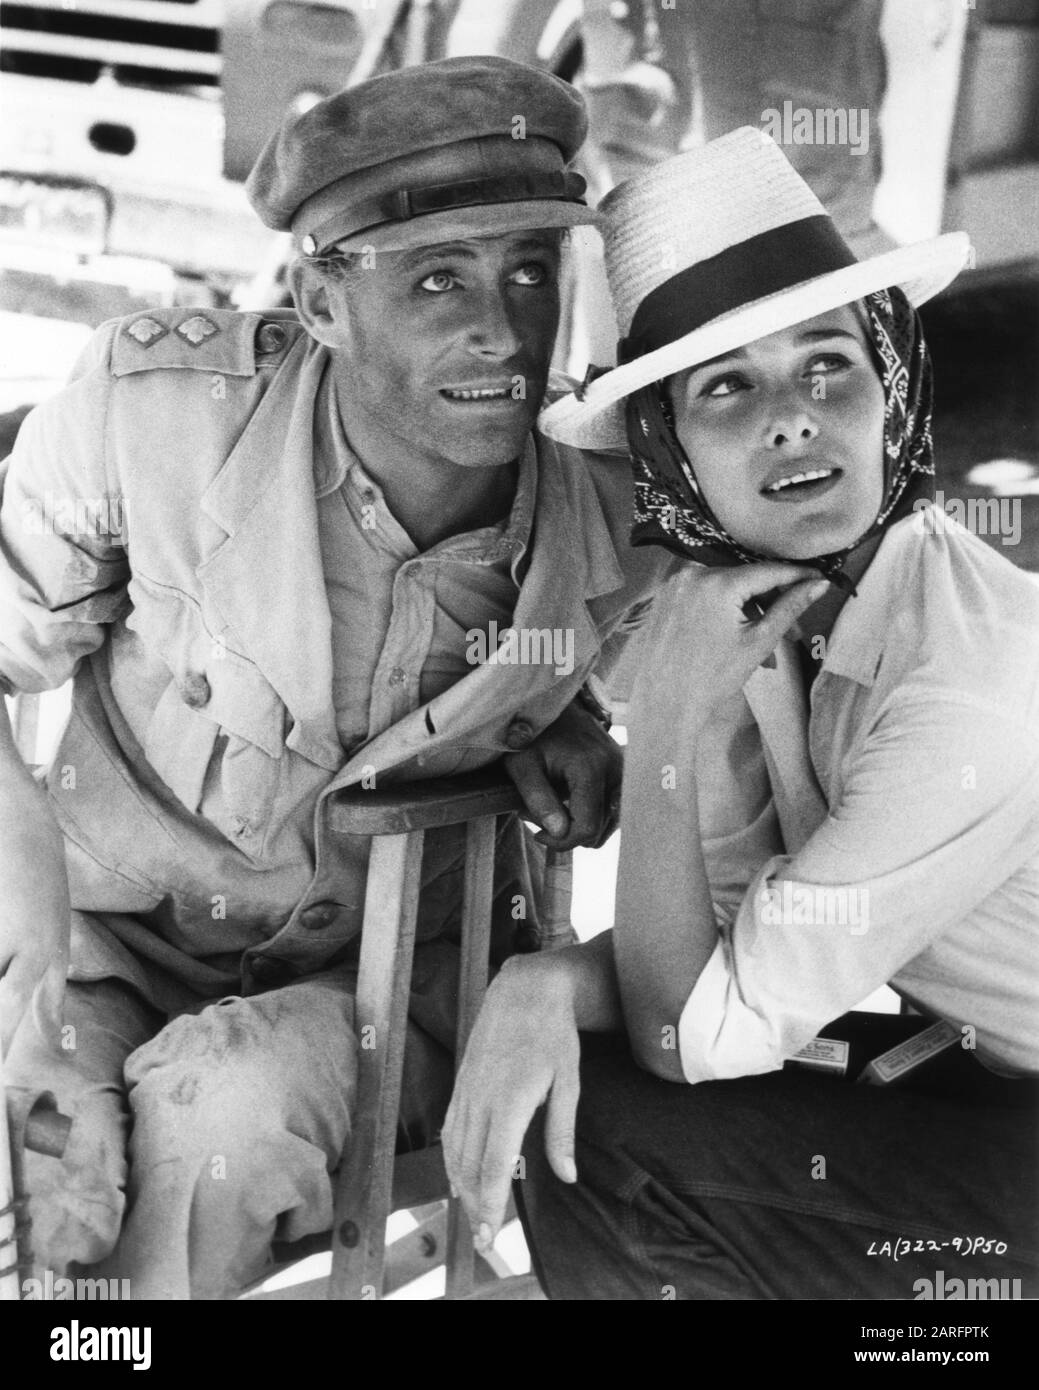 PETER O'TOOLE in costume as T.E. Lawrence and his wife SIAN PHILLIPS on set location candid during filming of LAWRENCE OF ARABIA 1962 director DAVID LEAN screenplay ROBERT BOLT and  MICHAEL WILSON producer SAM SPIEGEL Horizon Pictures / Columbia Pictures Corporation Stock Photo